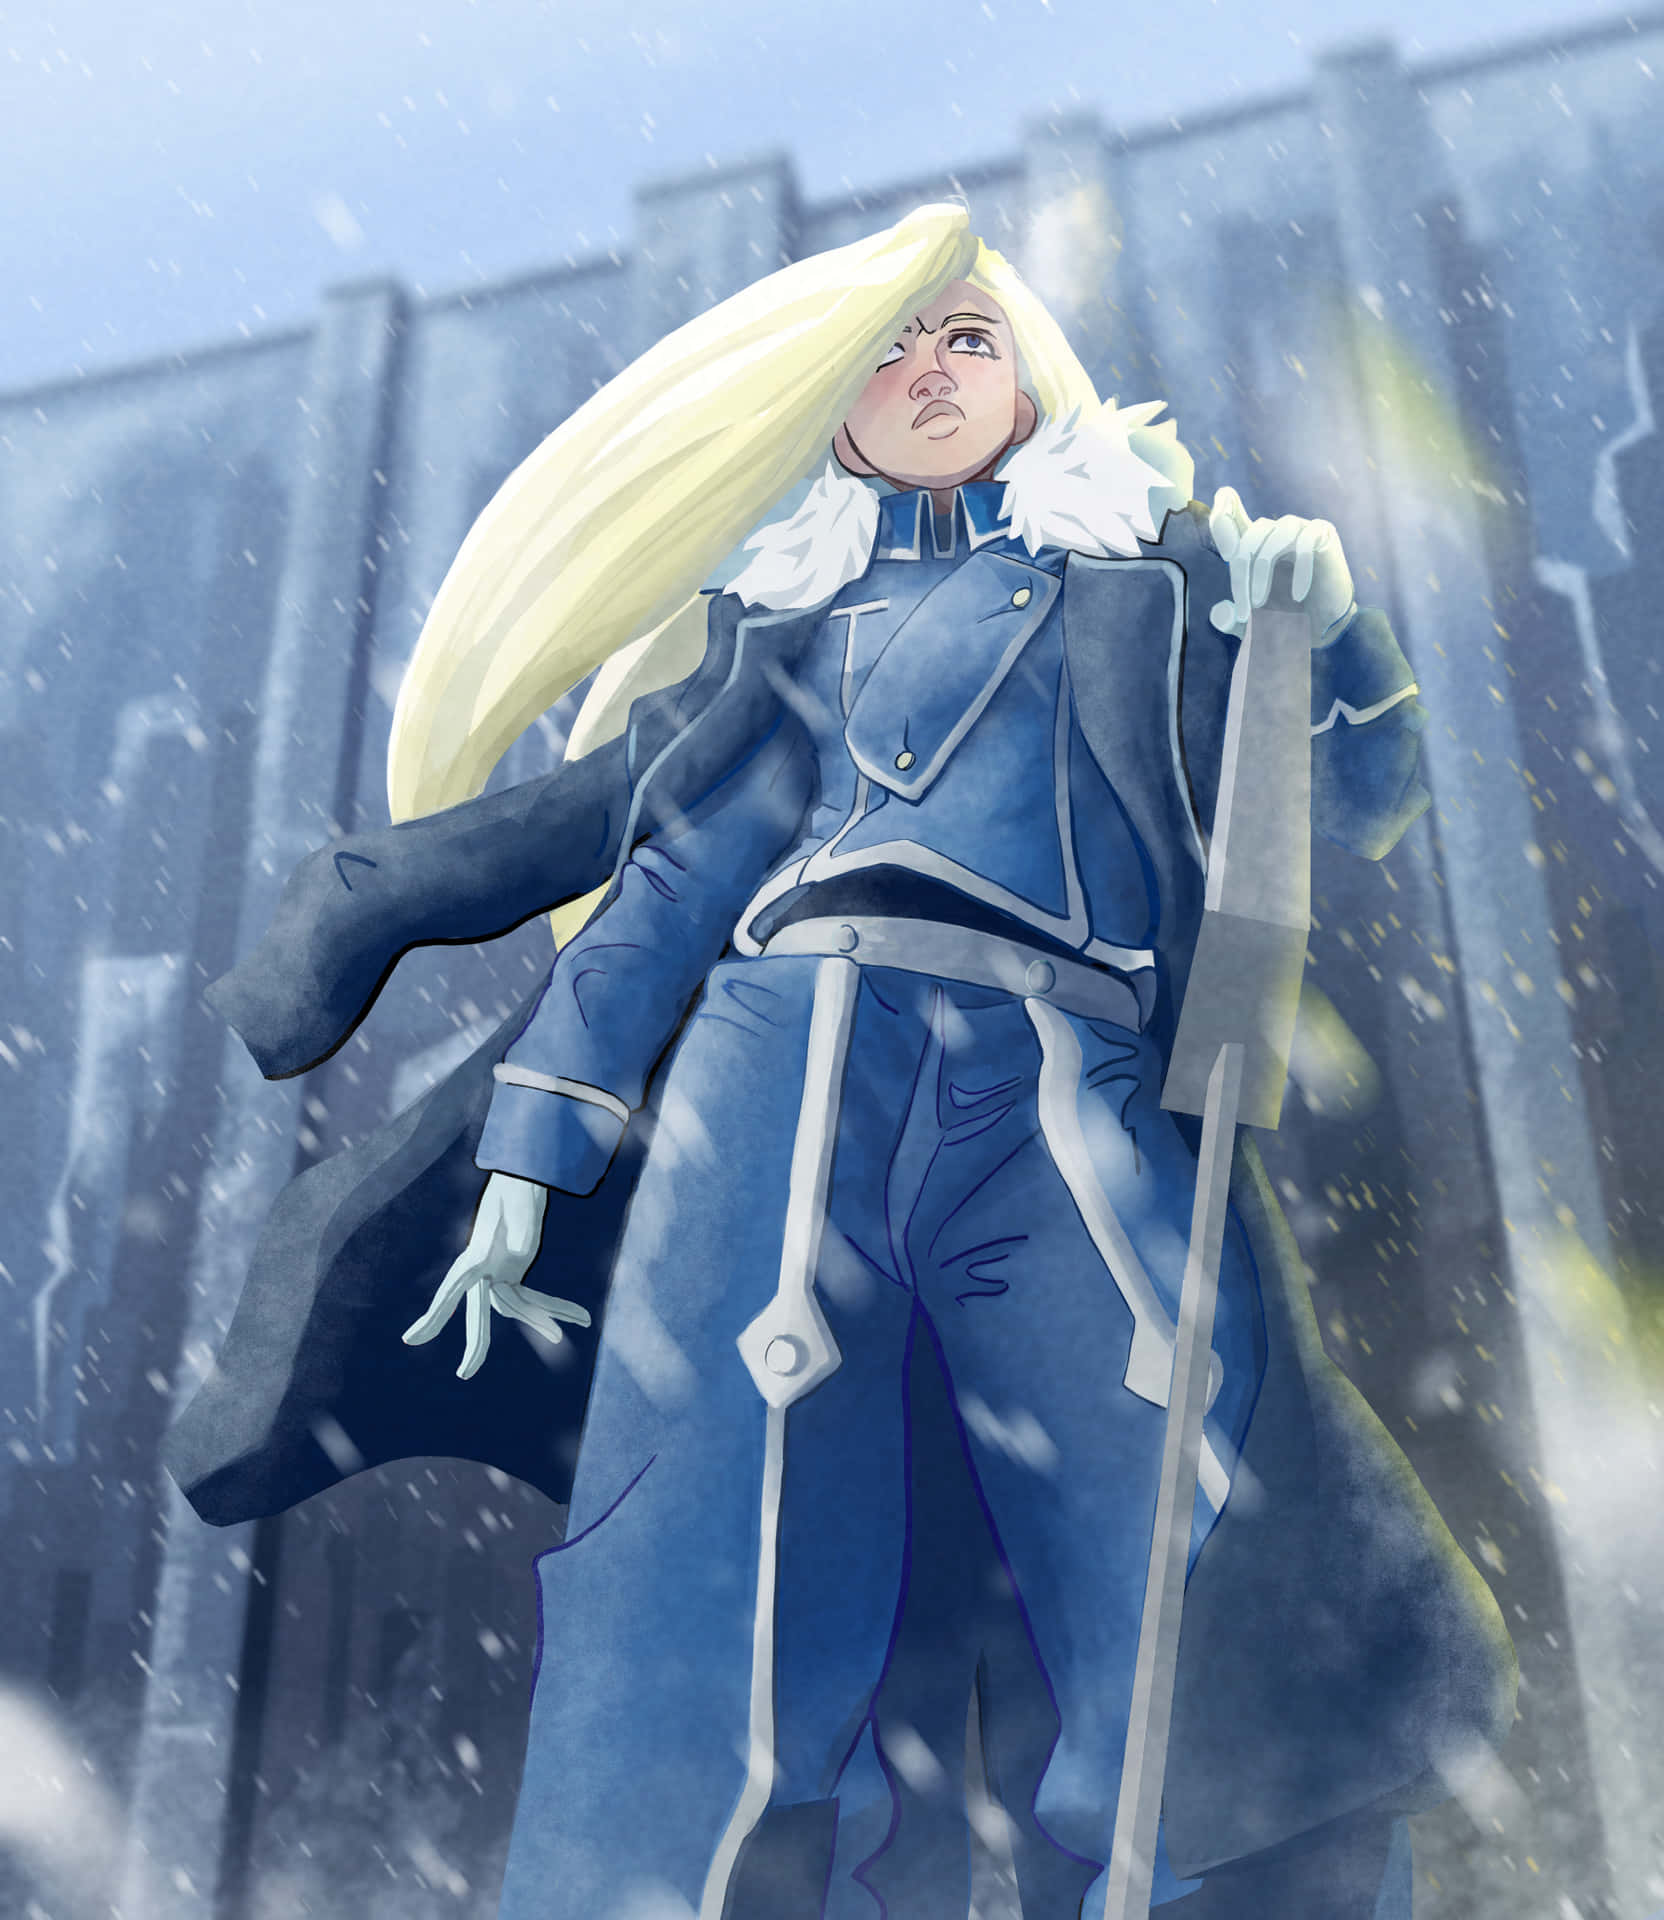 Olivier Mira Armstrong, the Ice Queen of Fort Briggs Wallpaper